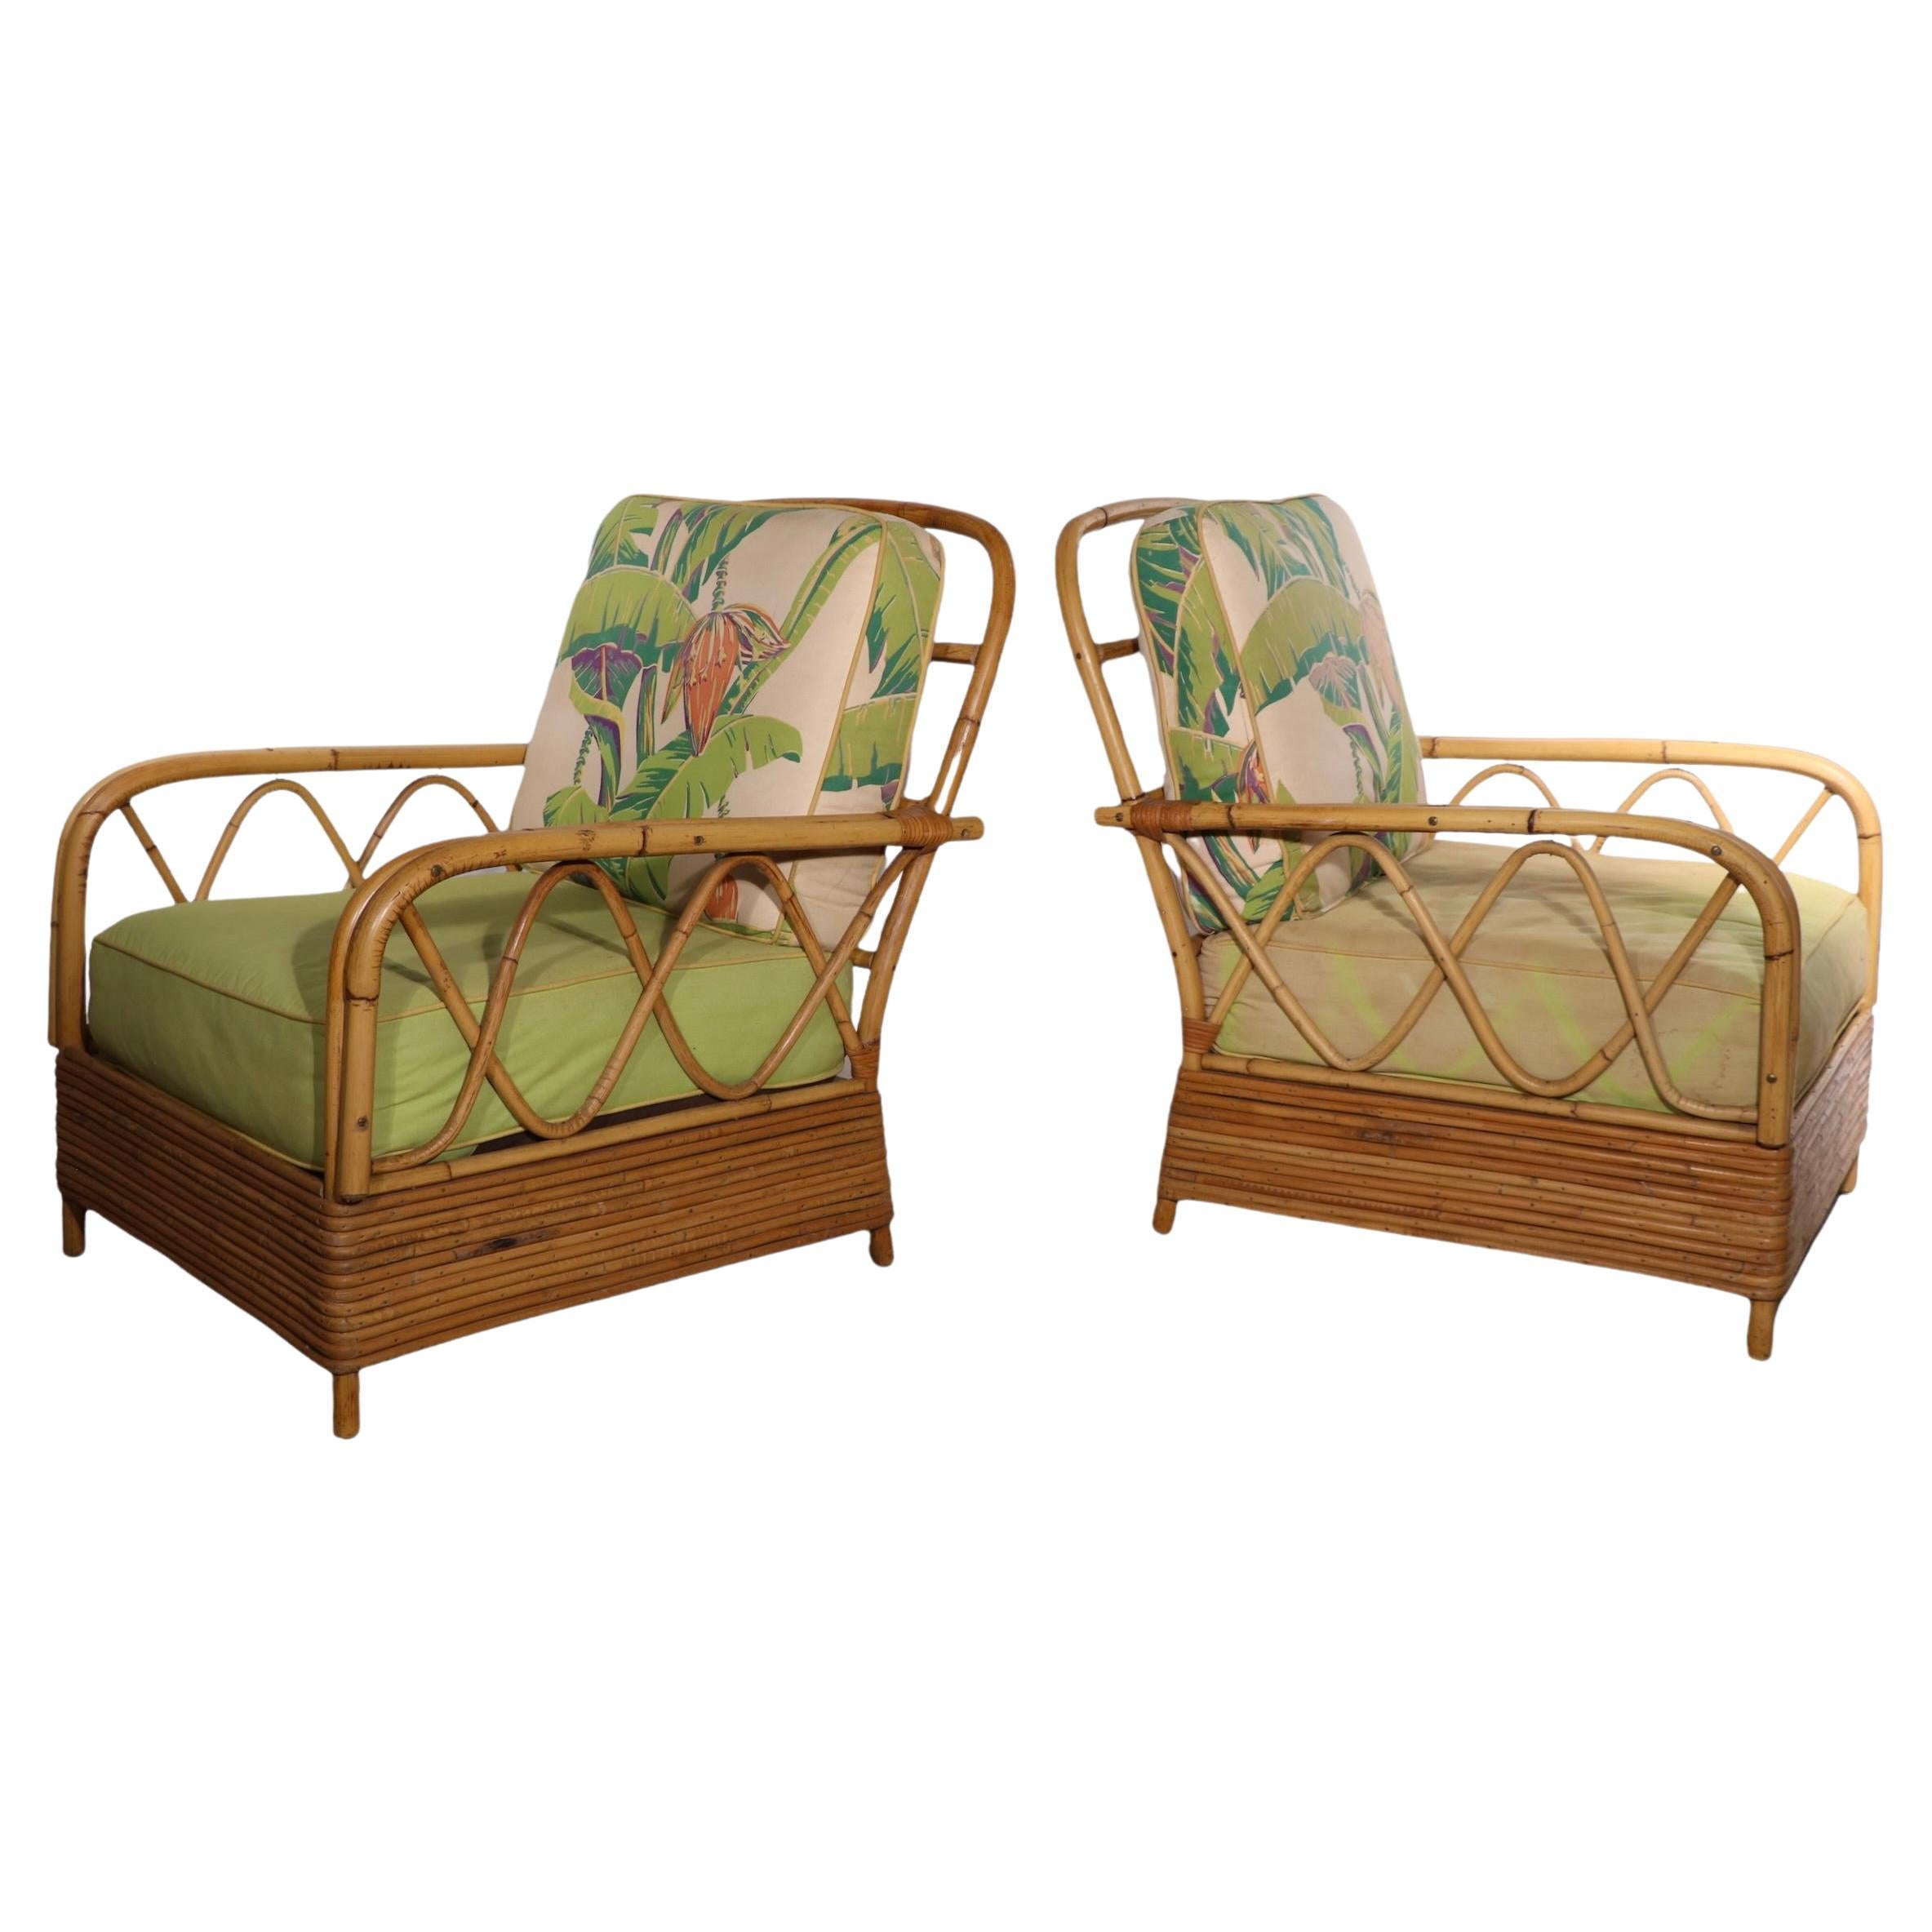 Pr. Mid Century Bamboo Lounge Chairs by Ficks Reed